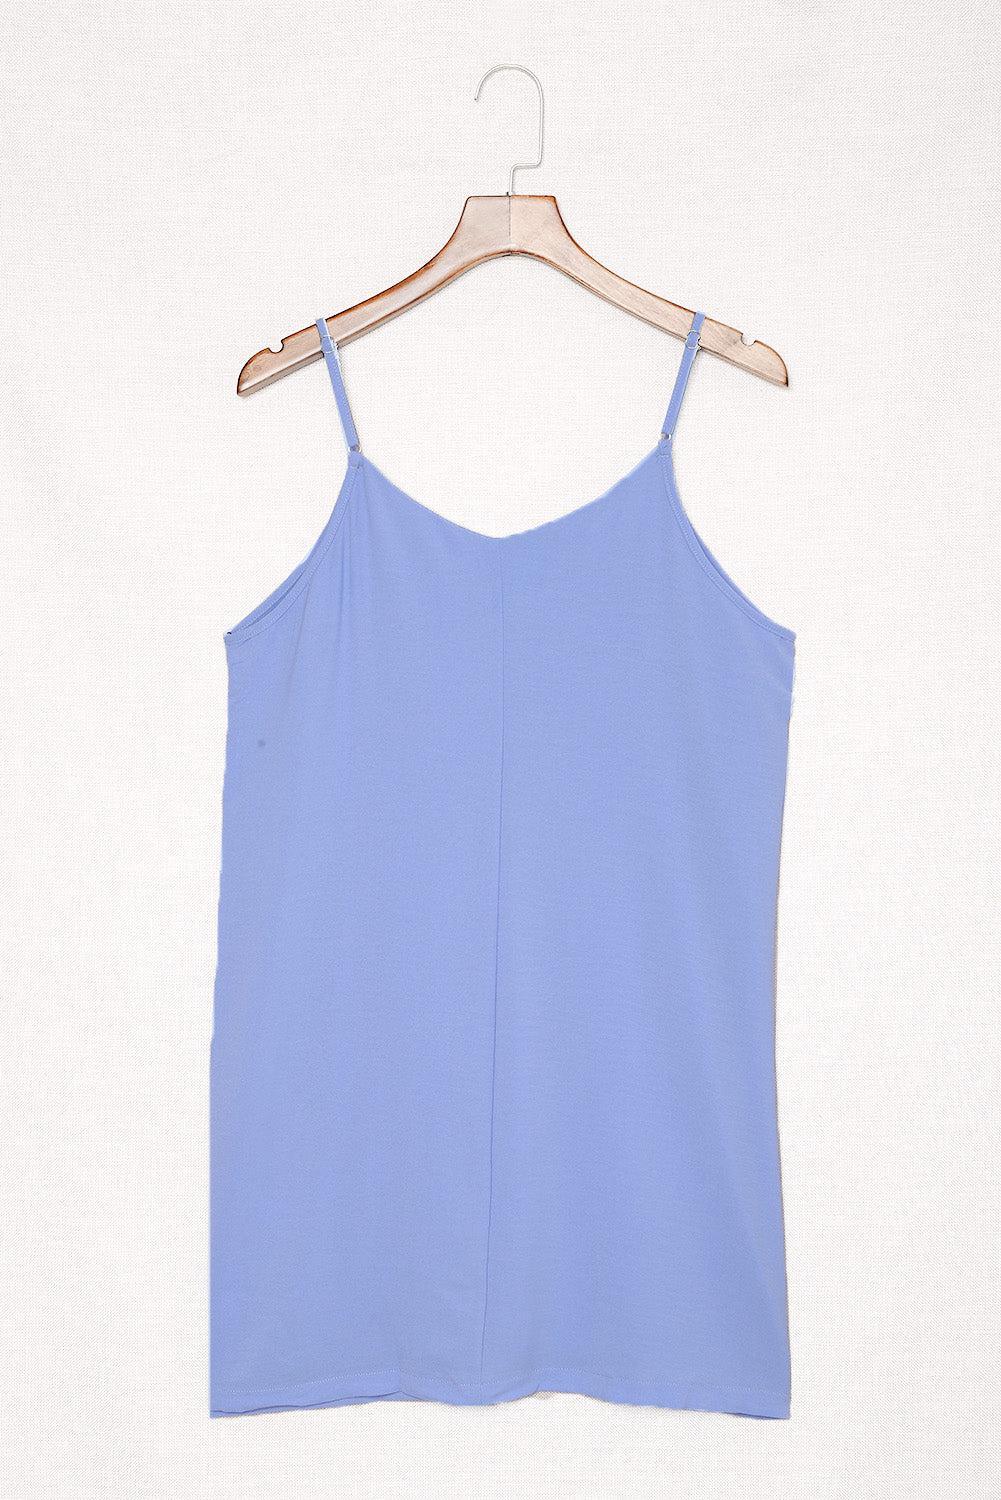 a blue top hanging on a wooden hanger